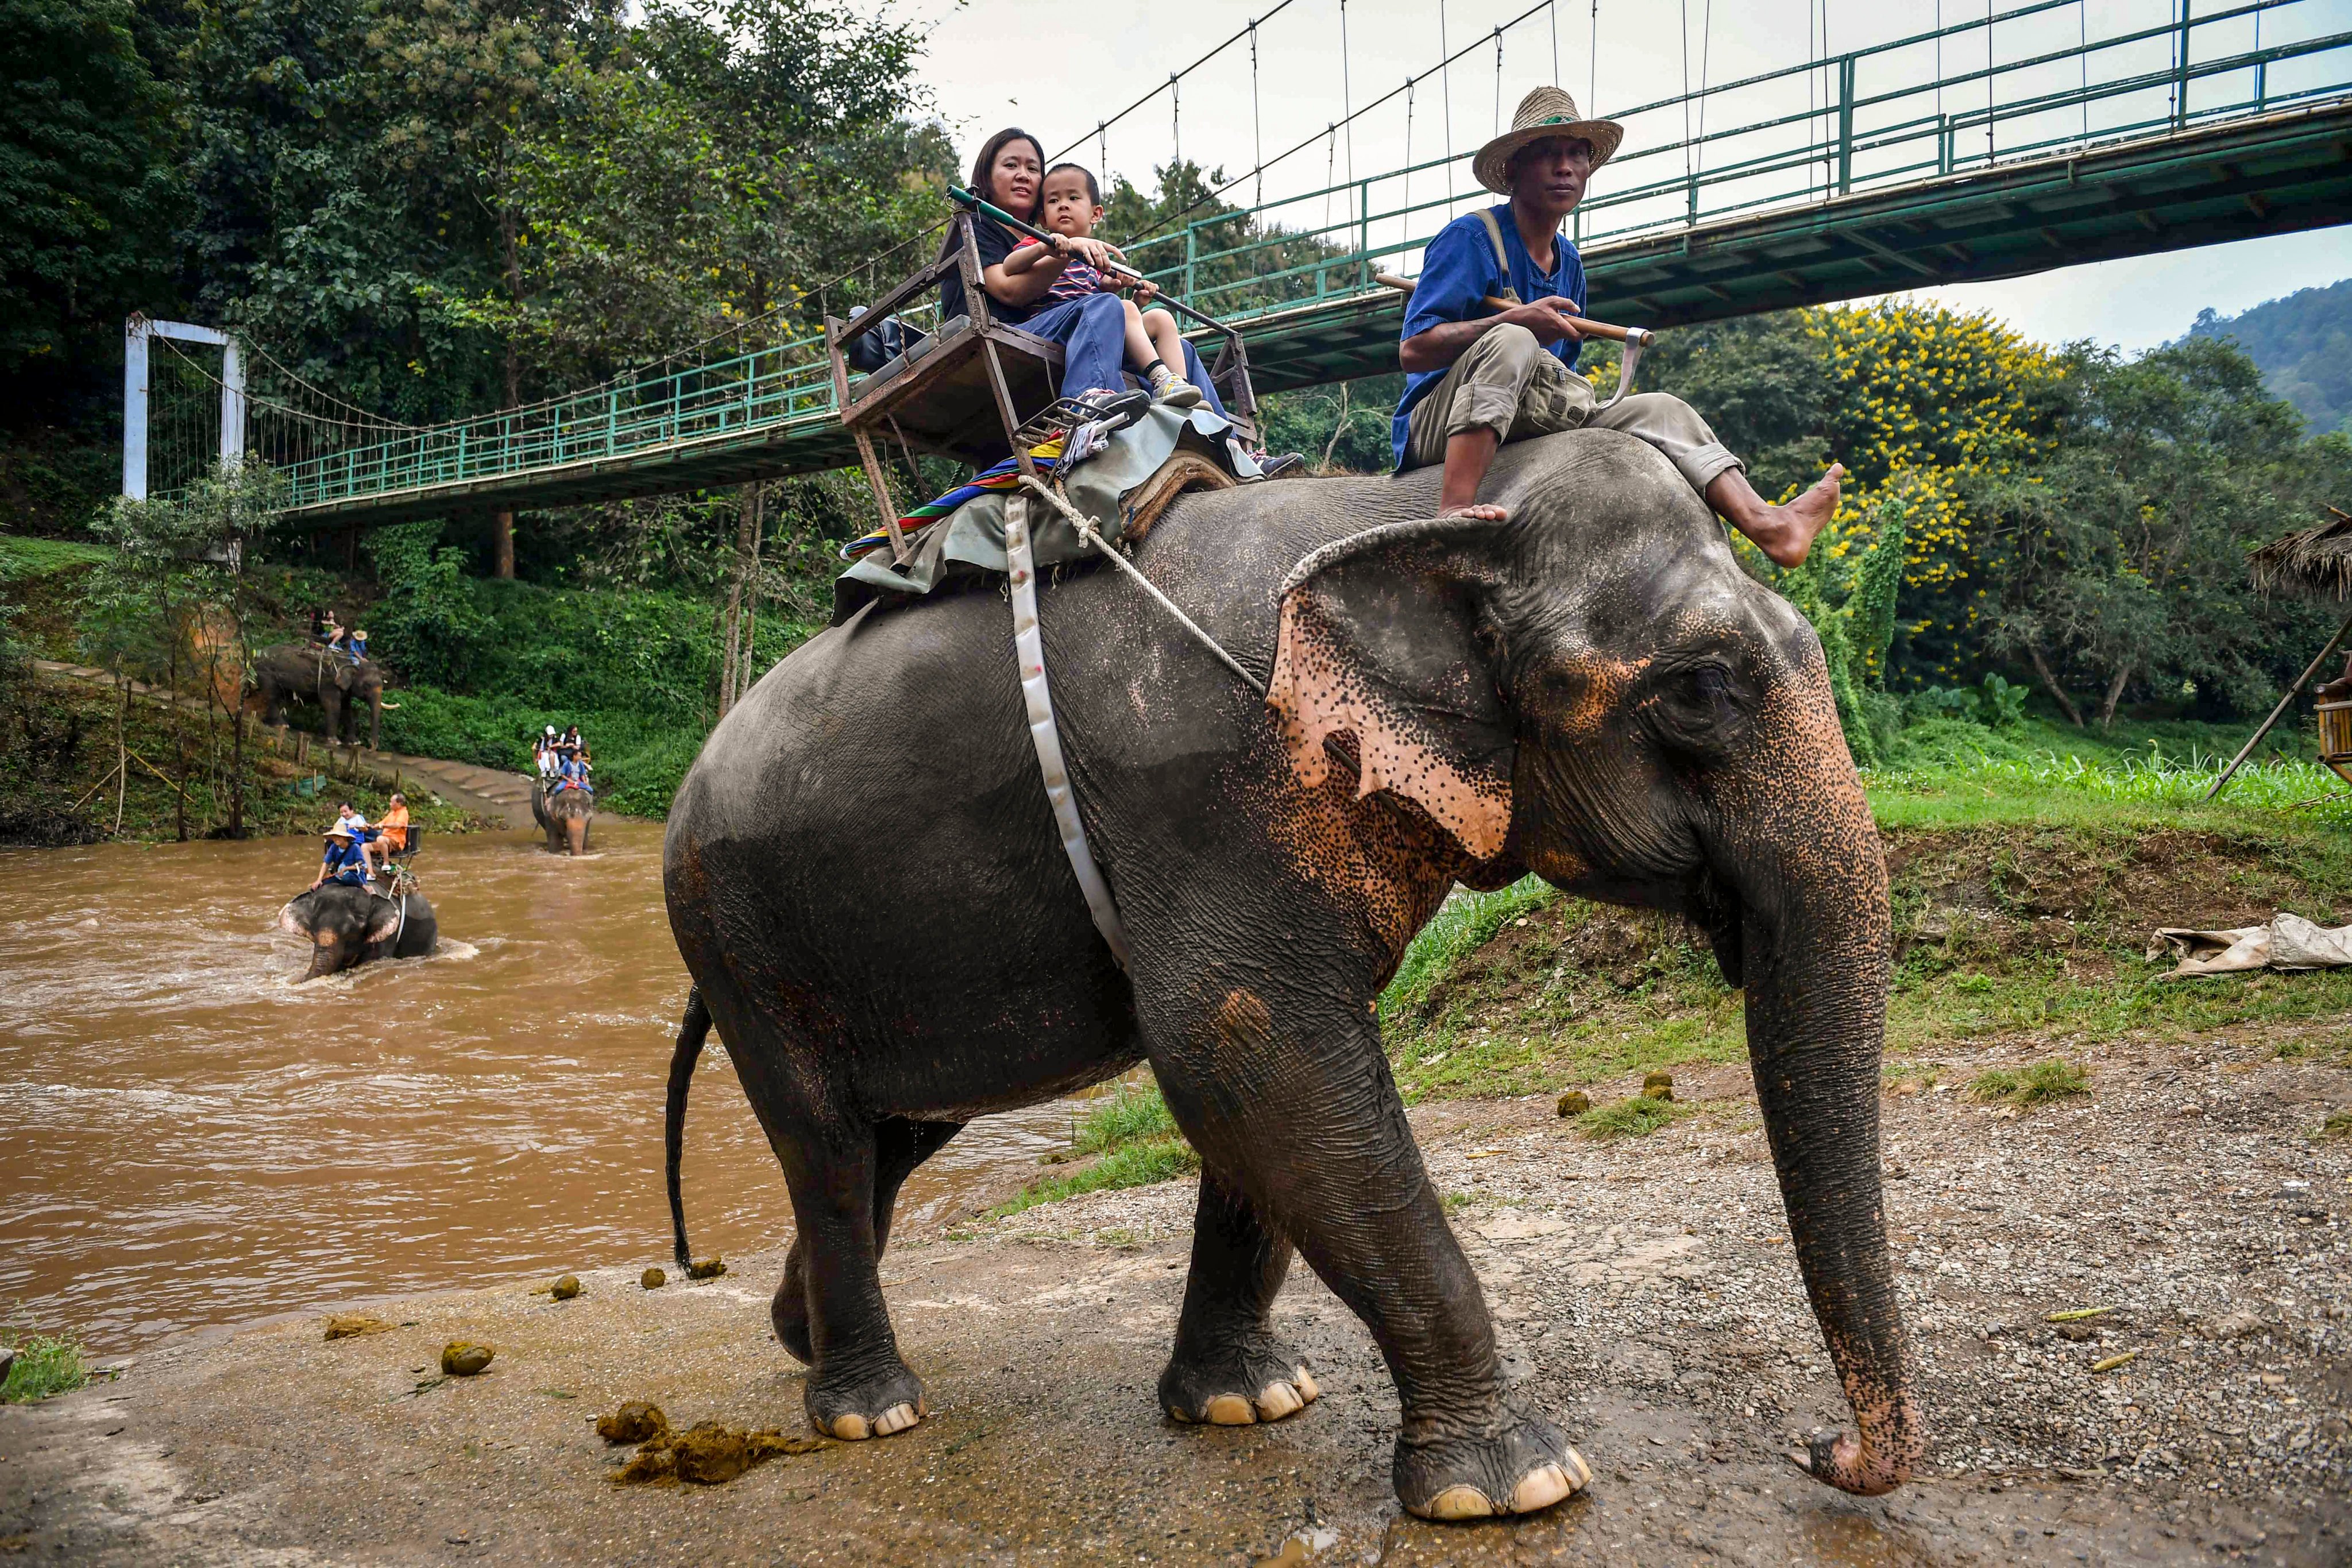 Tourists riding elephants at the Maetaeng Elephant Park, in Chiang Mai province, Thailand.  Separated from their mothers, jabbed with metal hooks, and sometimes deprived of food, Thai elephants are tamed by force. Up to 5.5 billion wild animals are being farmed globally in terrible conditions and exploited for tourism. Photo: AFP